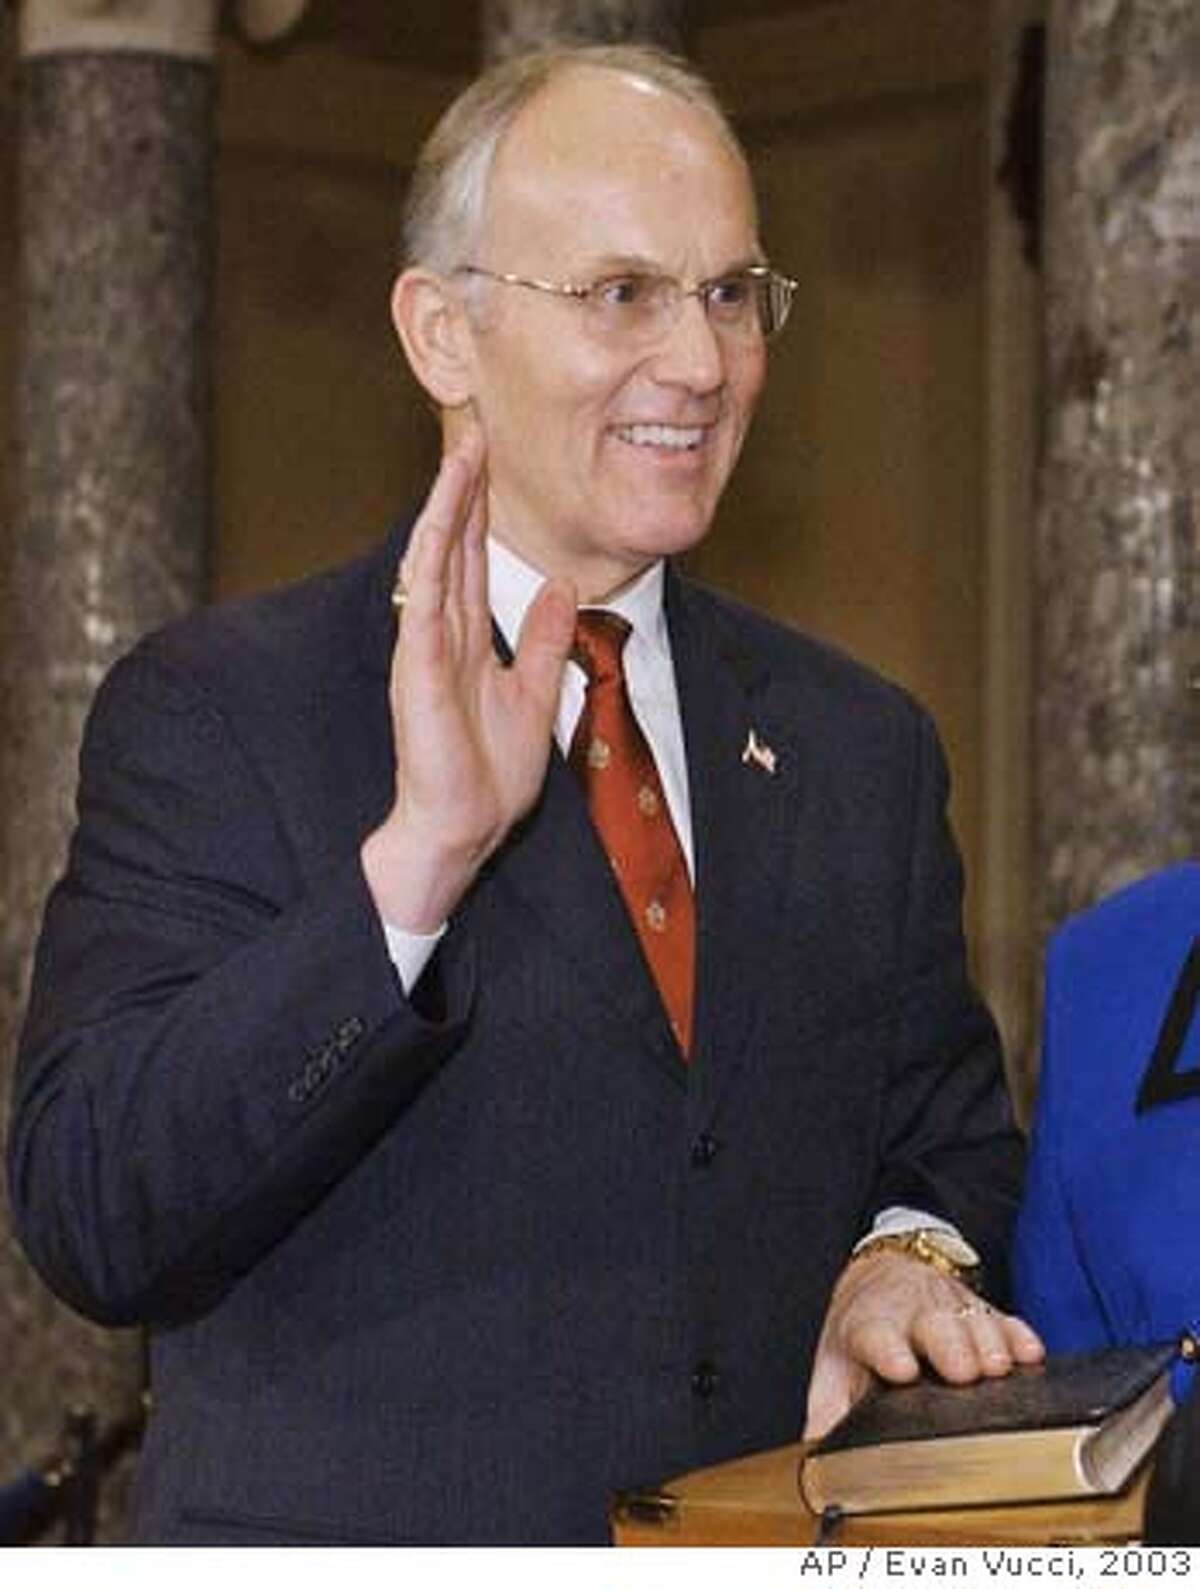 ** FILE **Sen. Larry Craig, R-Idaho, takes the oath of office during a mock swearing in ceremony in the Old Senate Chamber on Capitol Hill in Washington, in this Tuesday, Jan. 7, 2003, file photo. Craig of Idaho pleaded guilty in August 2007, to misdemeanor disorderly conduct after being arrested at the Minneapolis airport. Roll Call, a Capitol Hill newspaper, which first reported the case, said on its Web site Monday, Aug. 27, 2007, that Craig was arrested June 11 by a plainclothes officer investigating complaints of lewd conduct in a men's restroom at the airport. (AP Photos/Evan Vucci) JAN. 7, 2003, FILE PHOTO